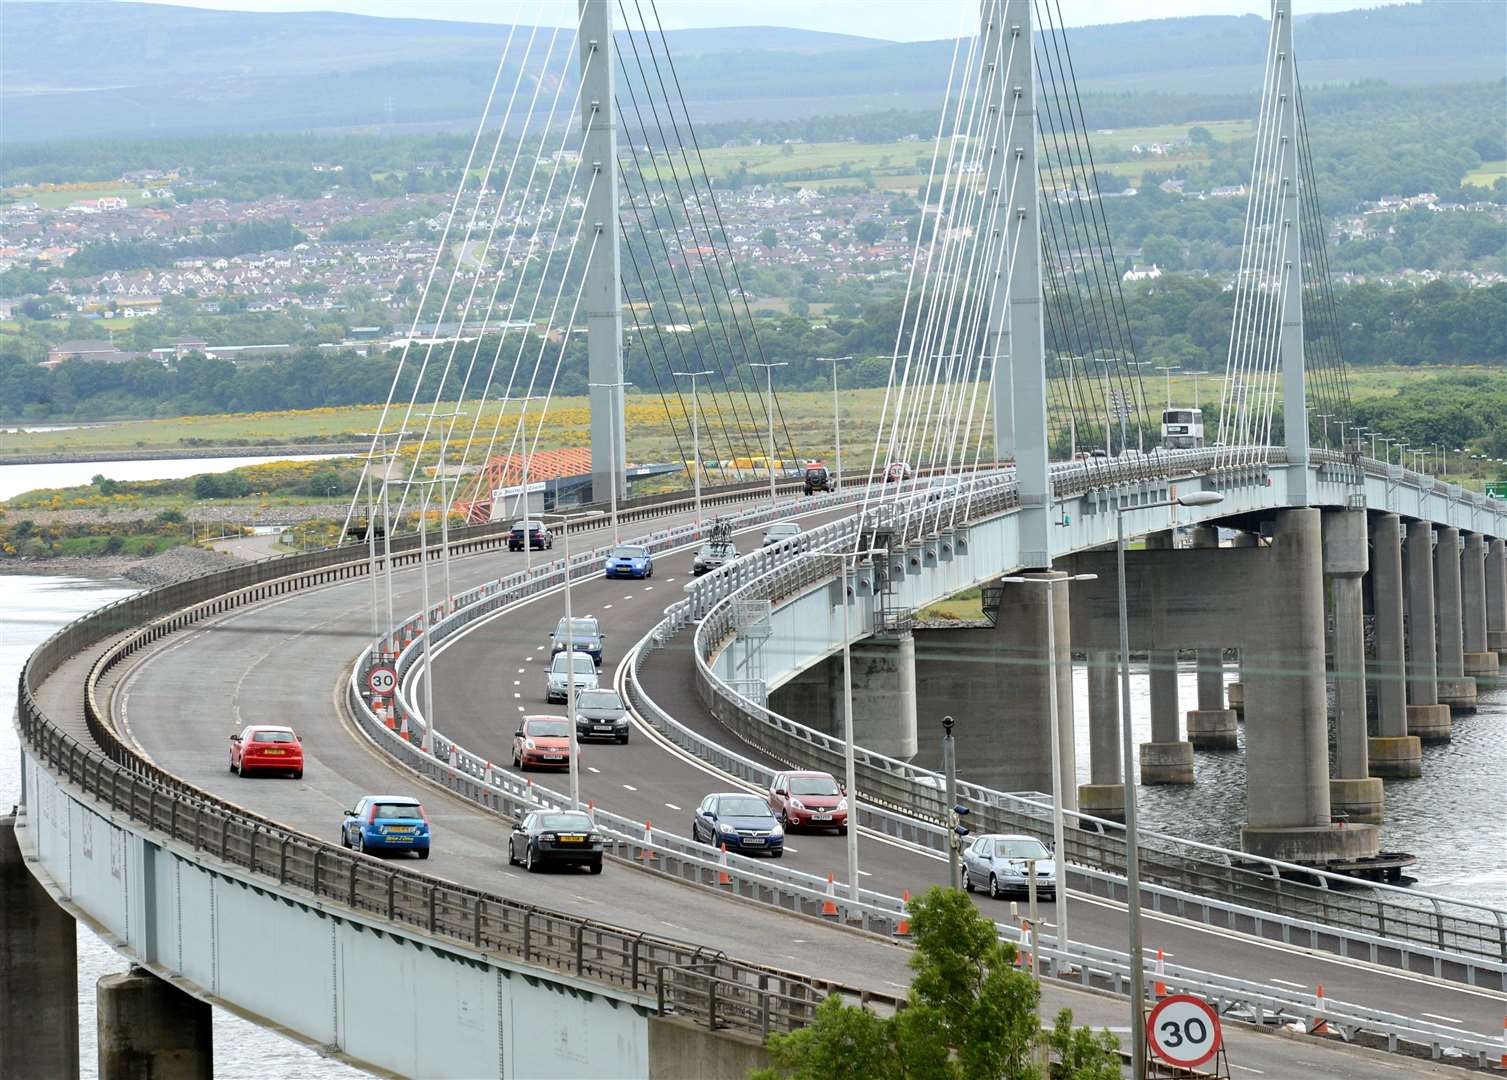 The roadworks will result in the temporary closure of a northbound lane of the A9 shortly after crossing the Kessock Bridge.